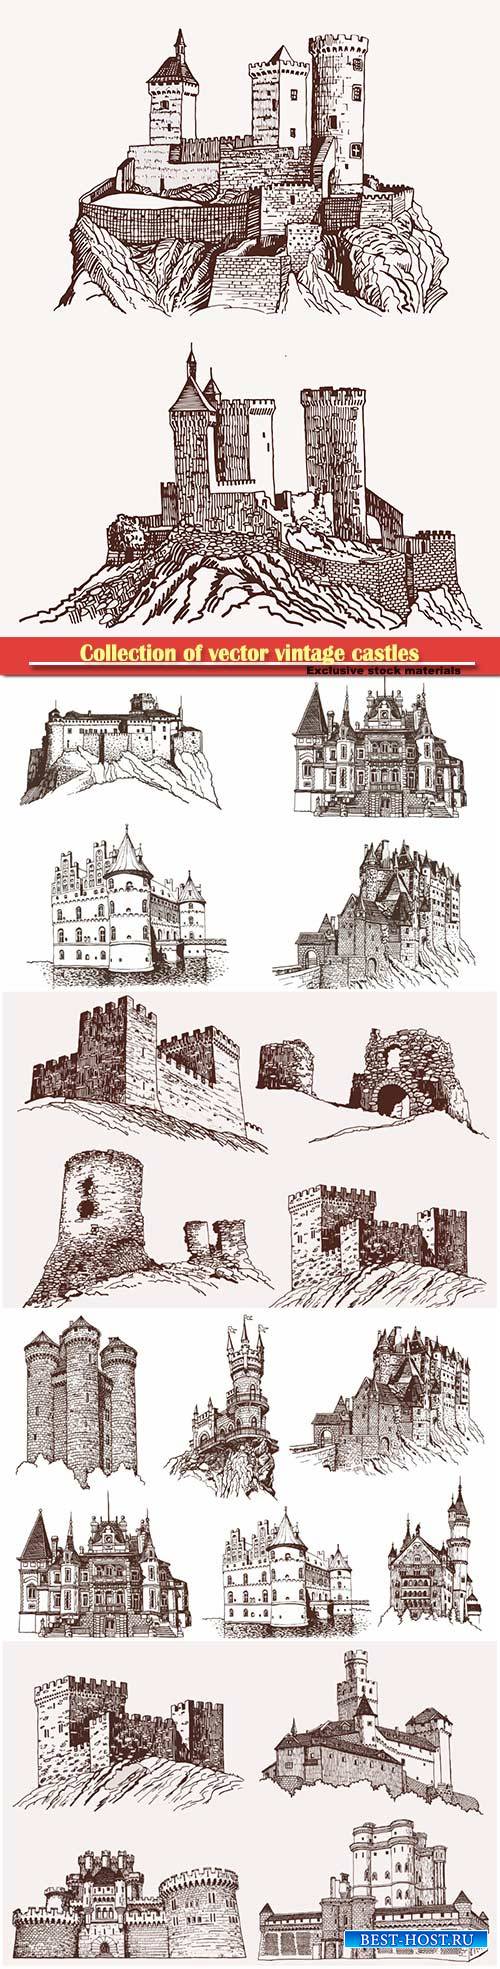 Collection of vector vintage castles